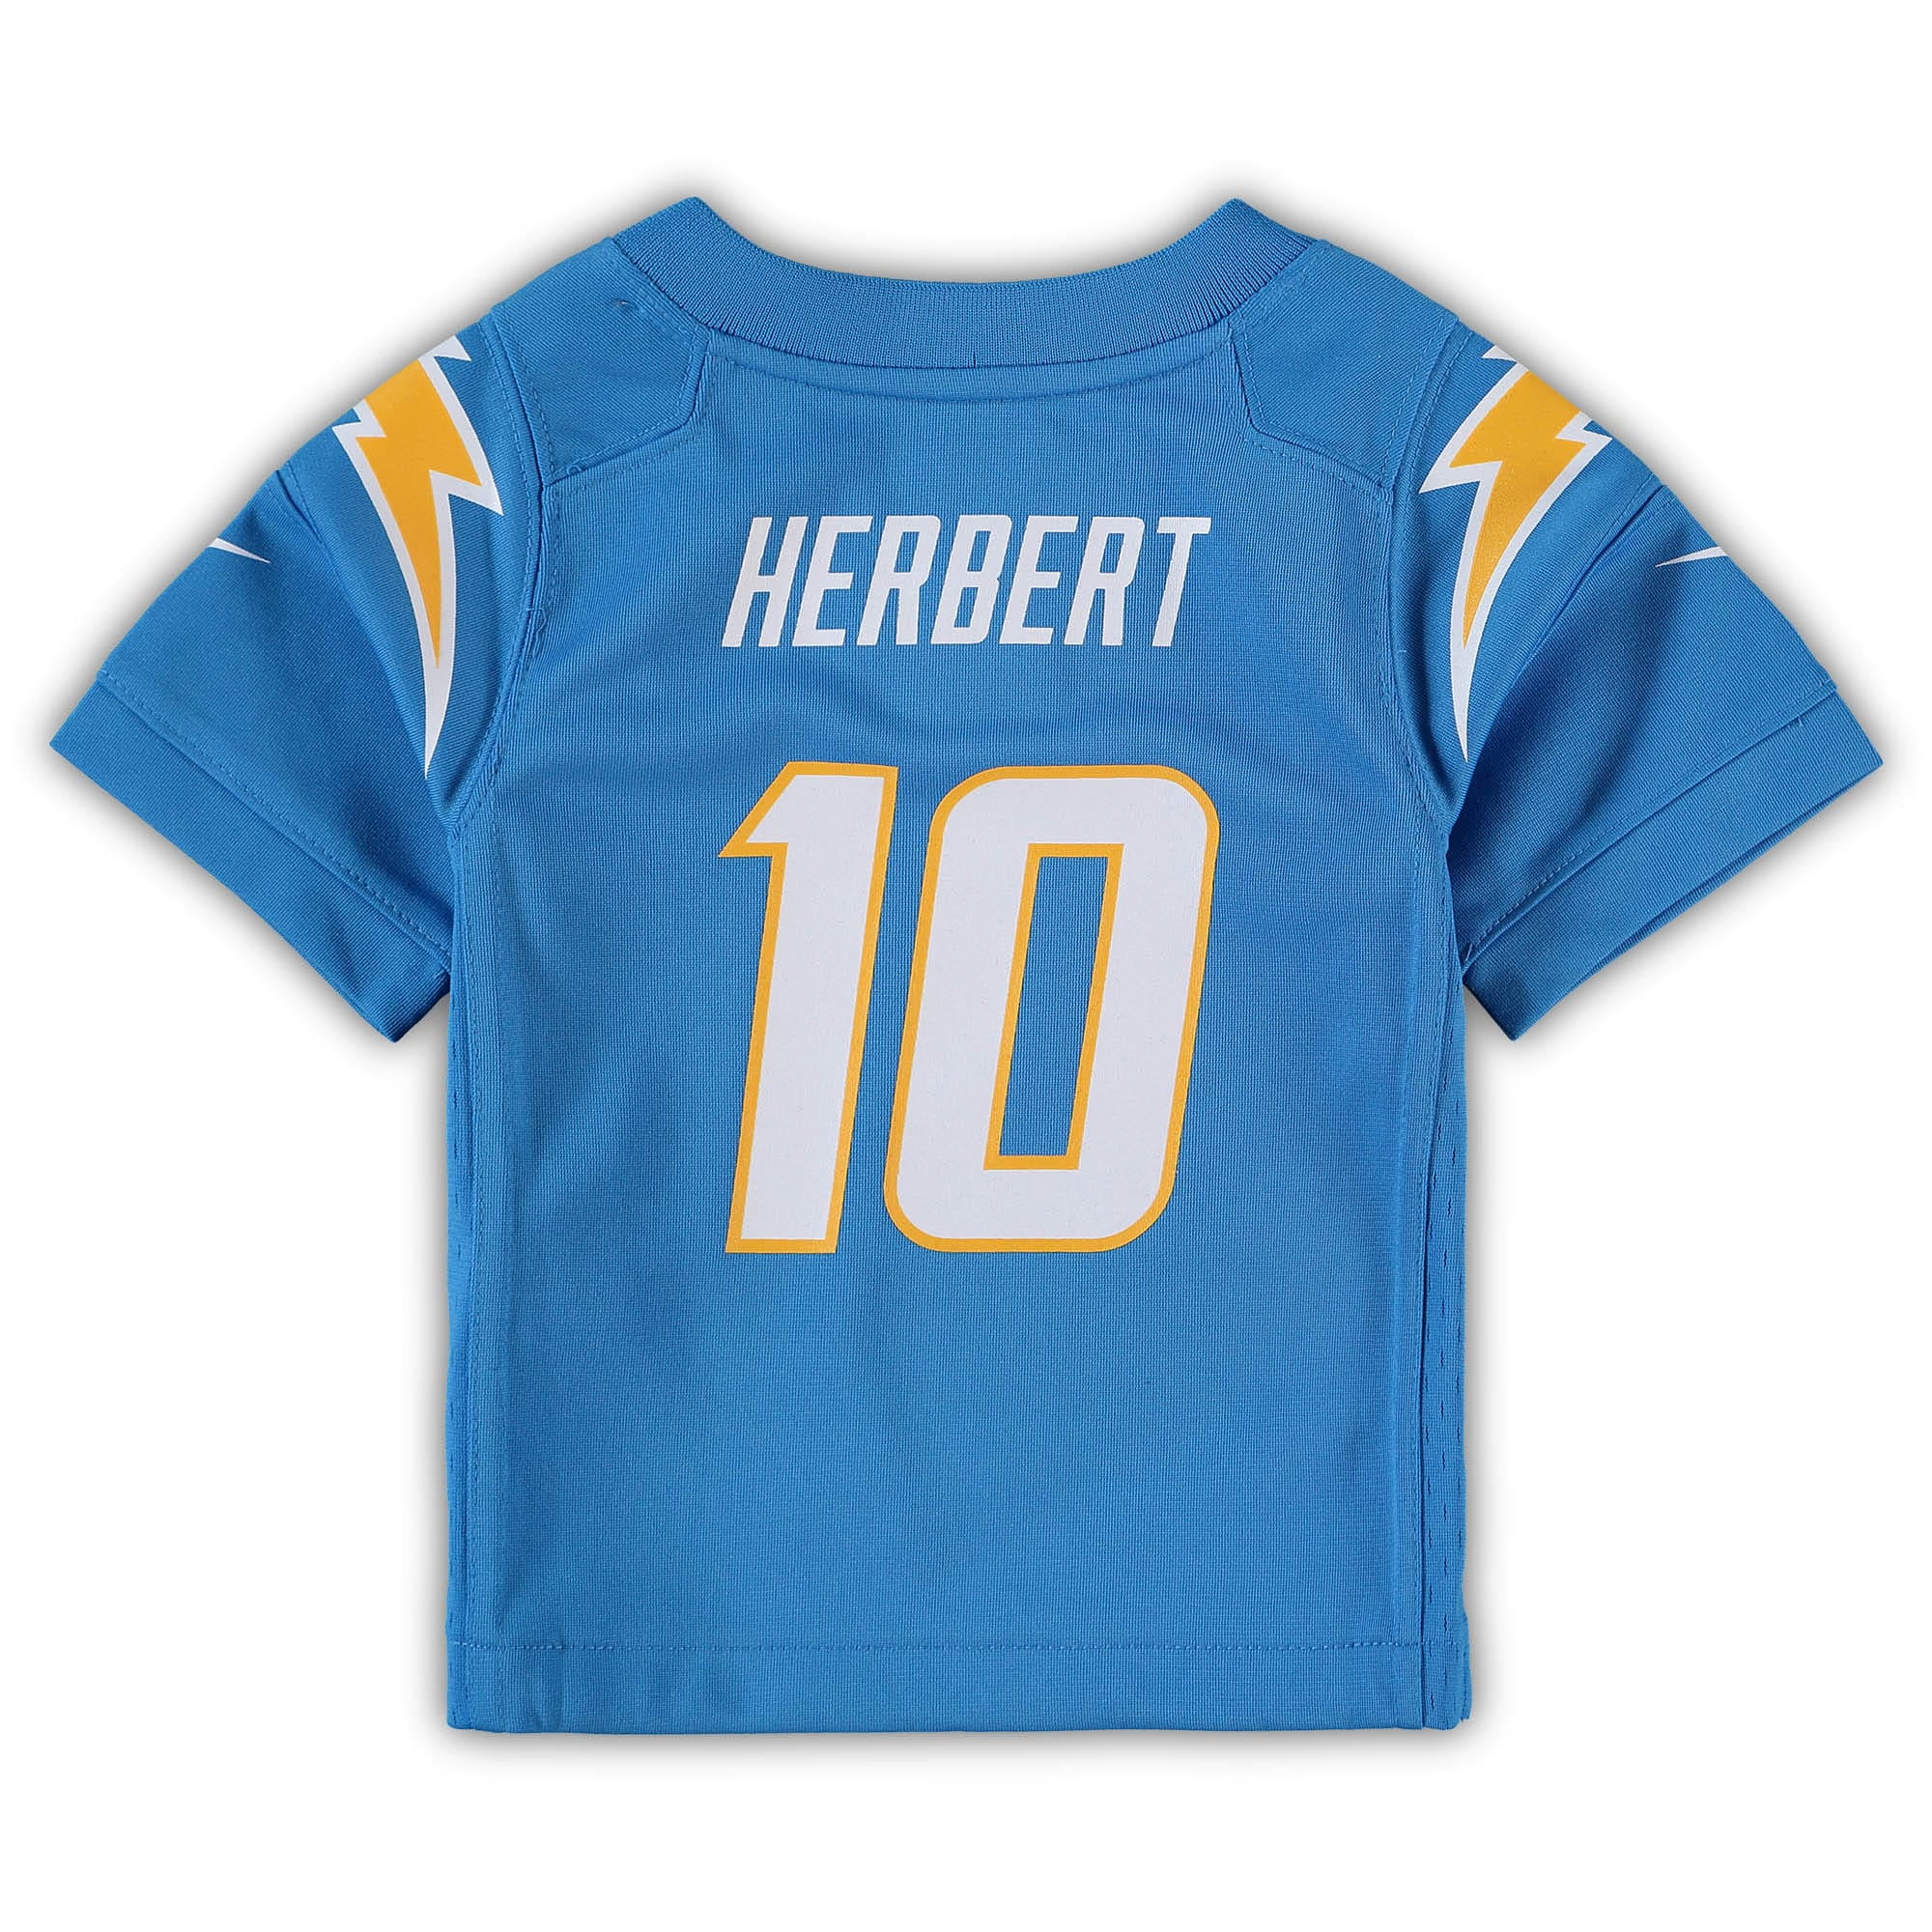 Official Chargers Baby Jerseys, Los Angeles Chargers Infant Clothes, Baby  Los Angeles Chargers Jersey